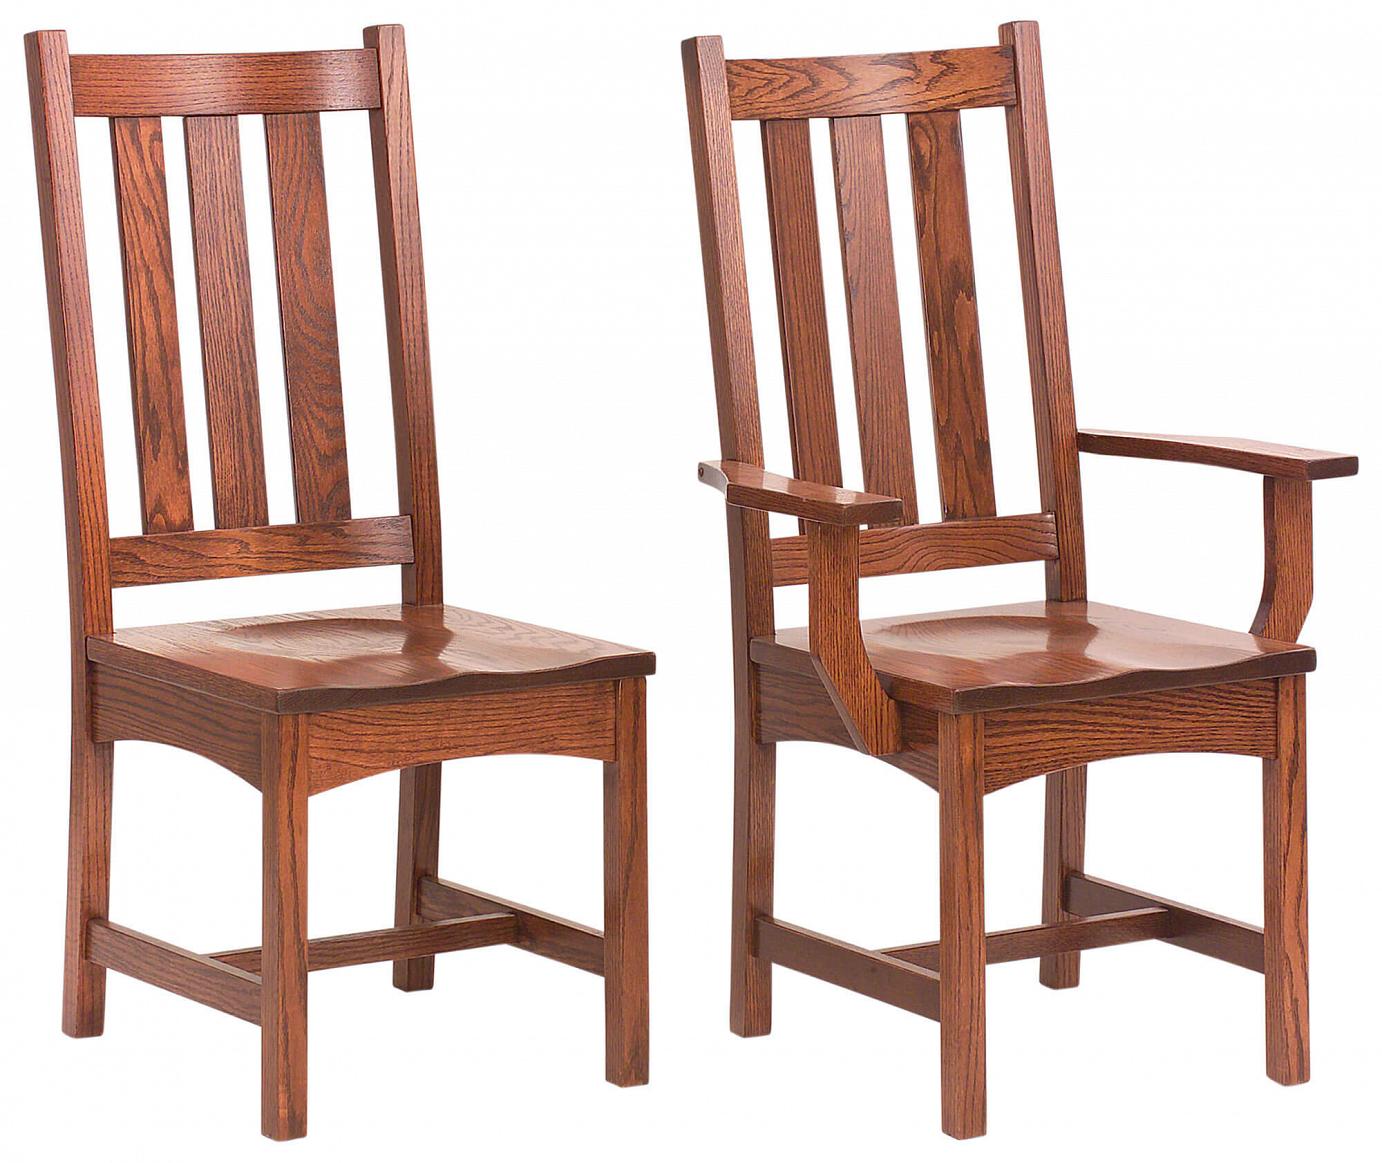 RH Yoder Vintage Mission Chairs